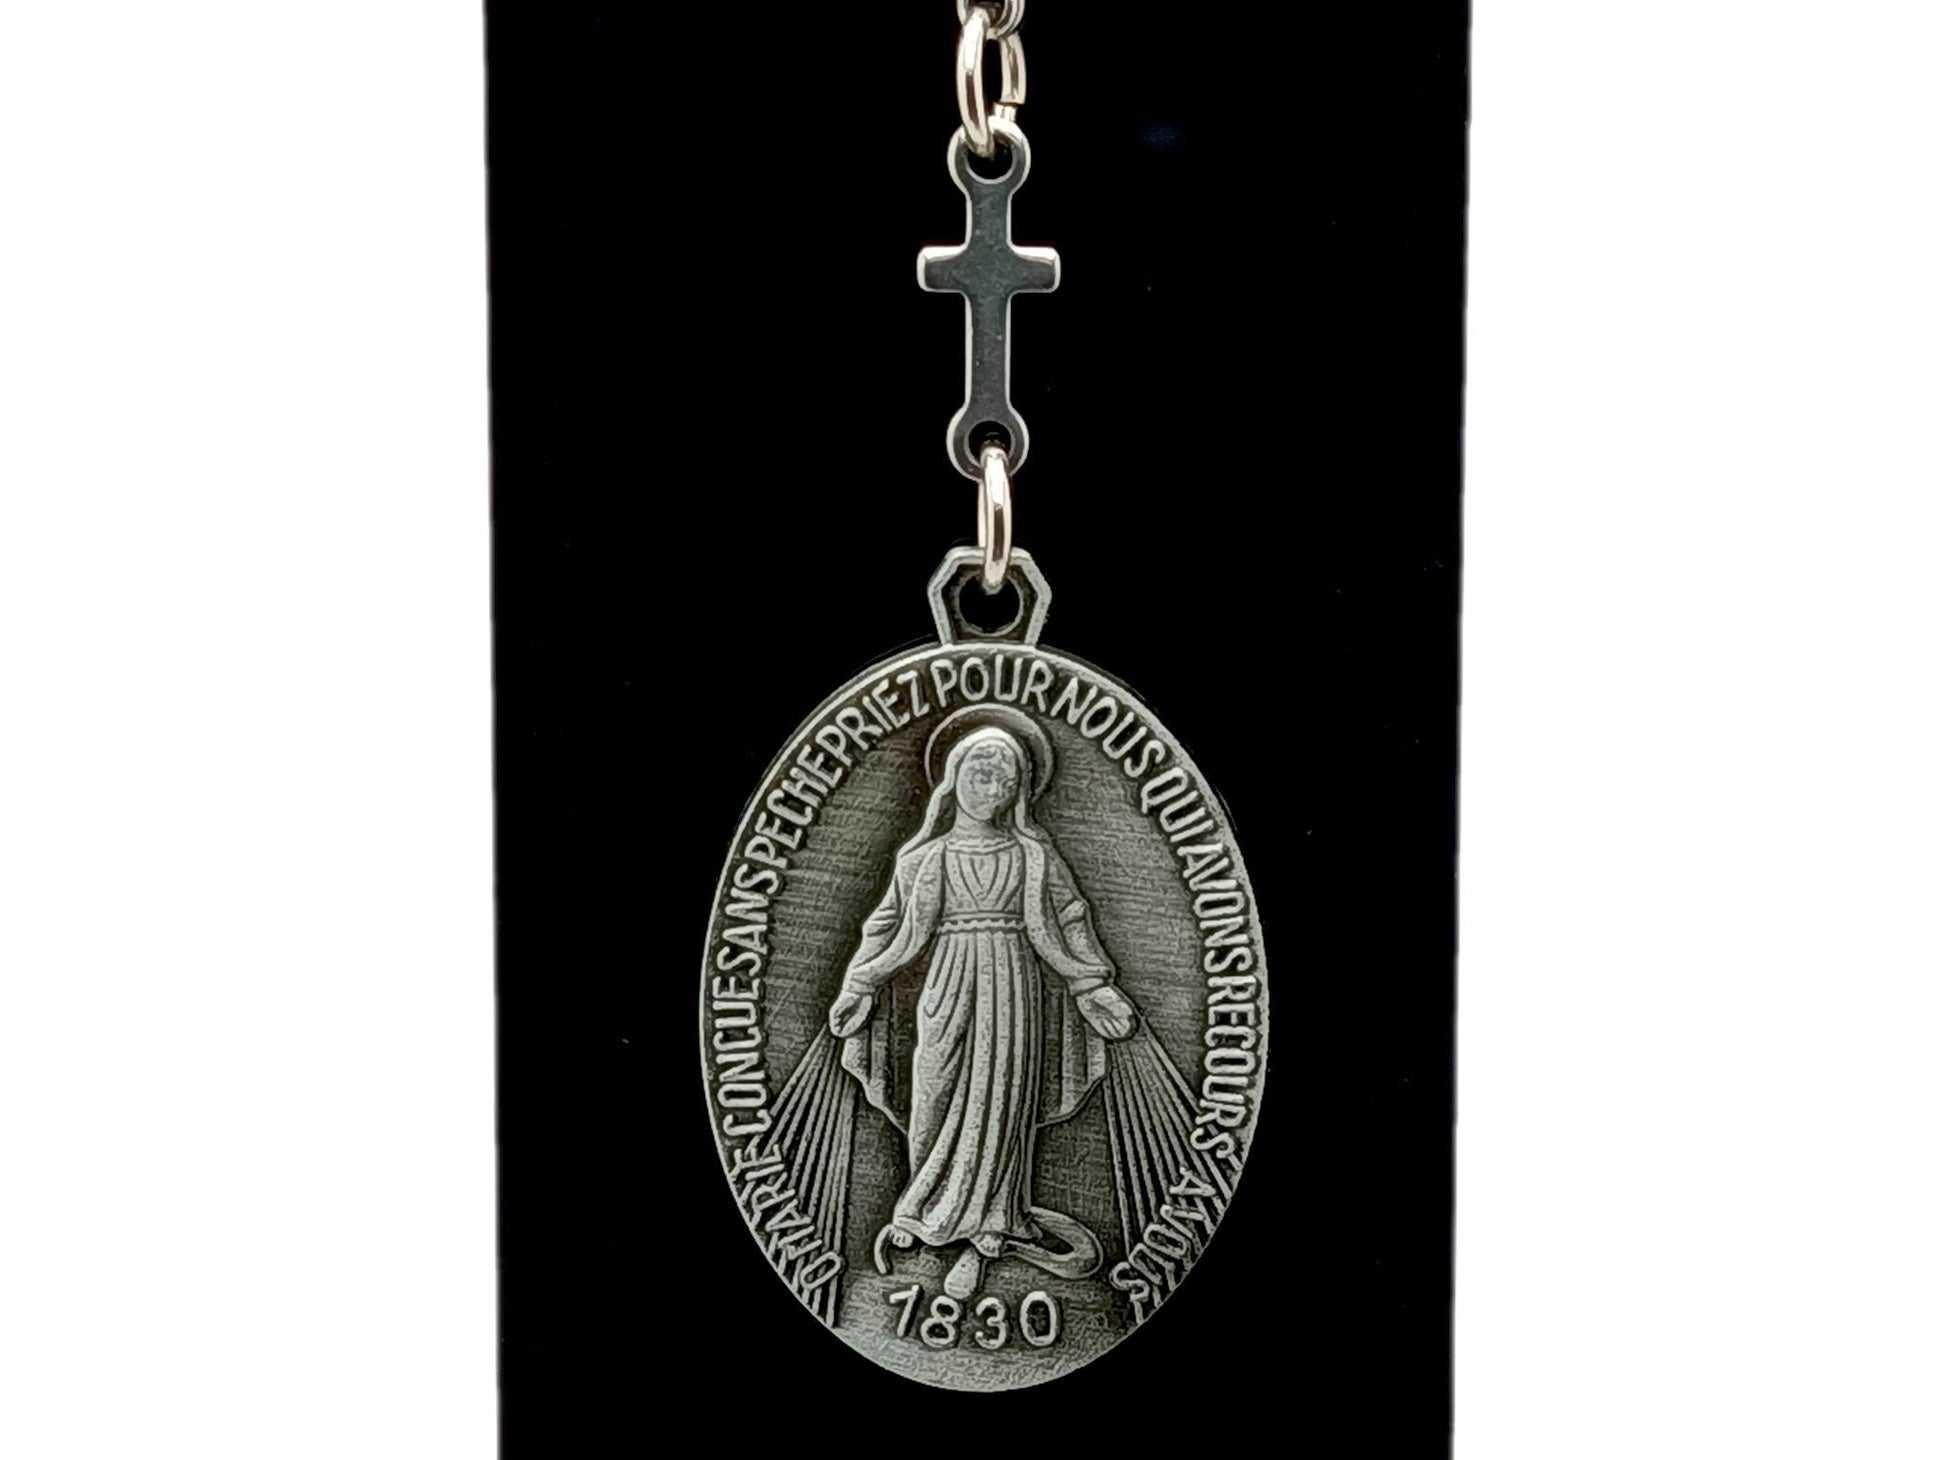 Large Miraculous medal unique rosary beads purse clip key chain with stainless steel linking cross.